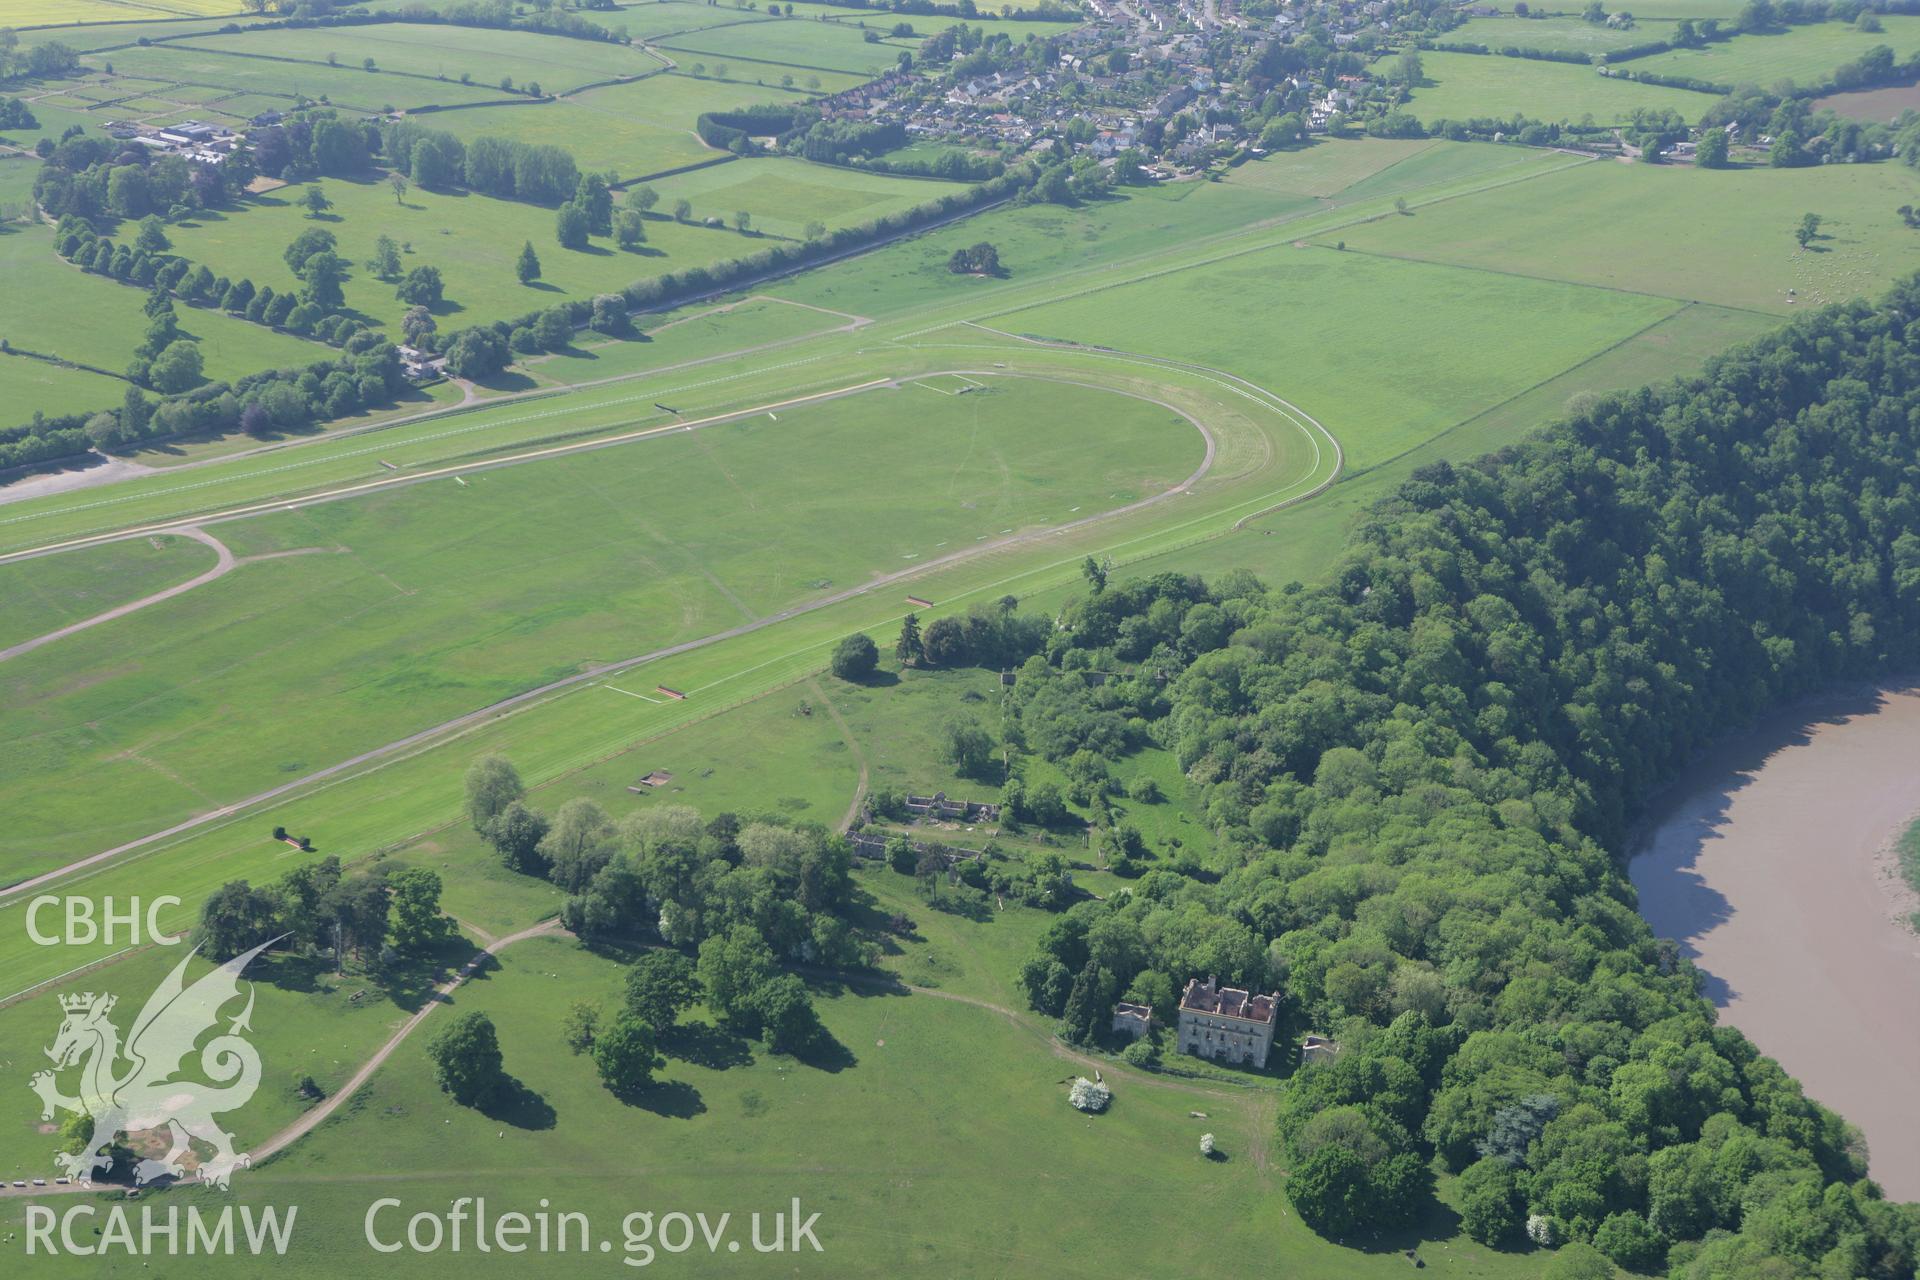 RCAHMW colour oblique photograph of Chepstow Racecourse. Taken by Toby Driver on 24/05/2010.